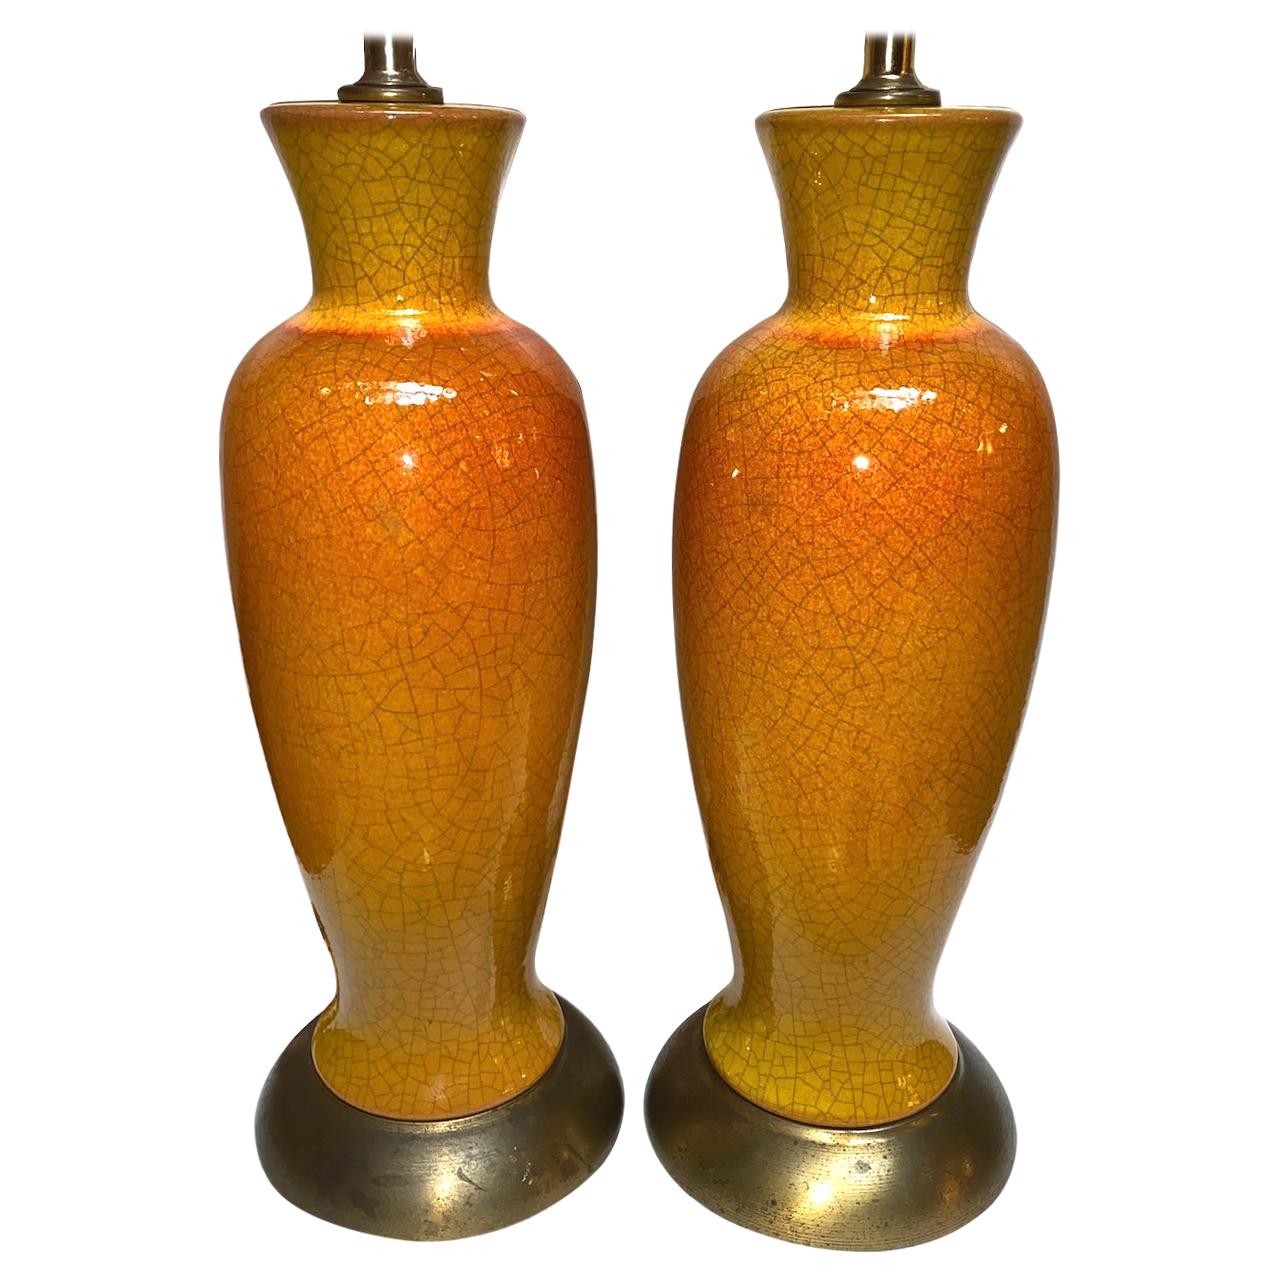 Pair of French Midcentury Crackled Porcelain Lamps